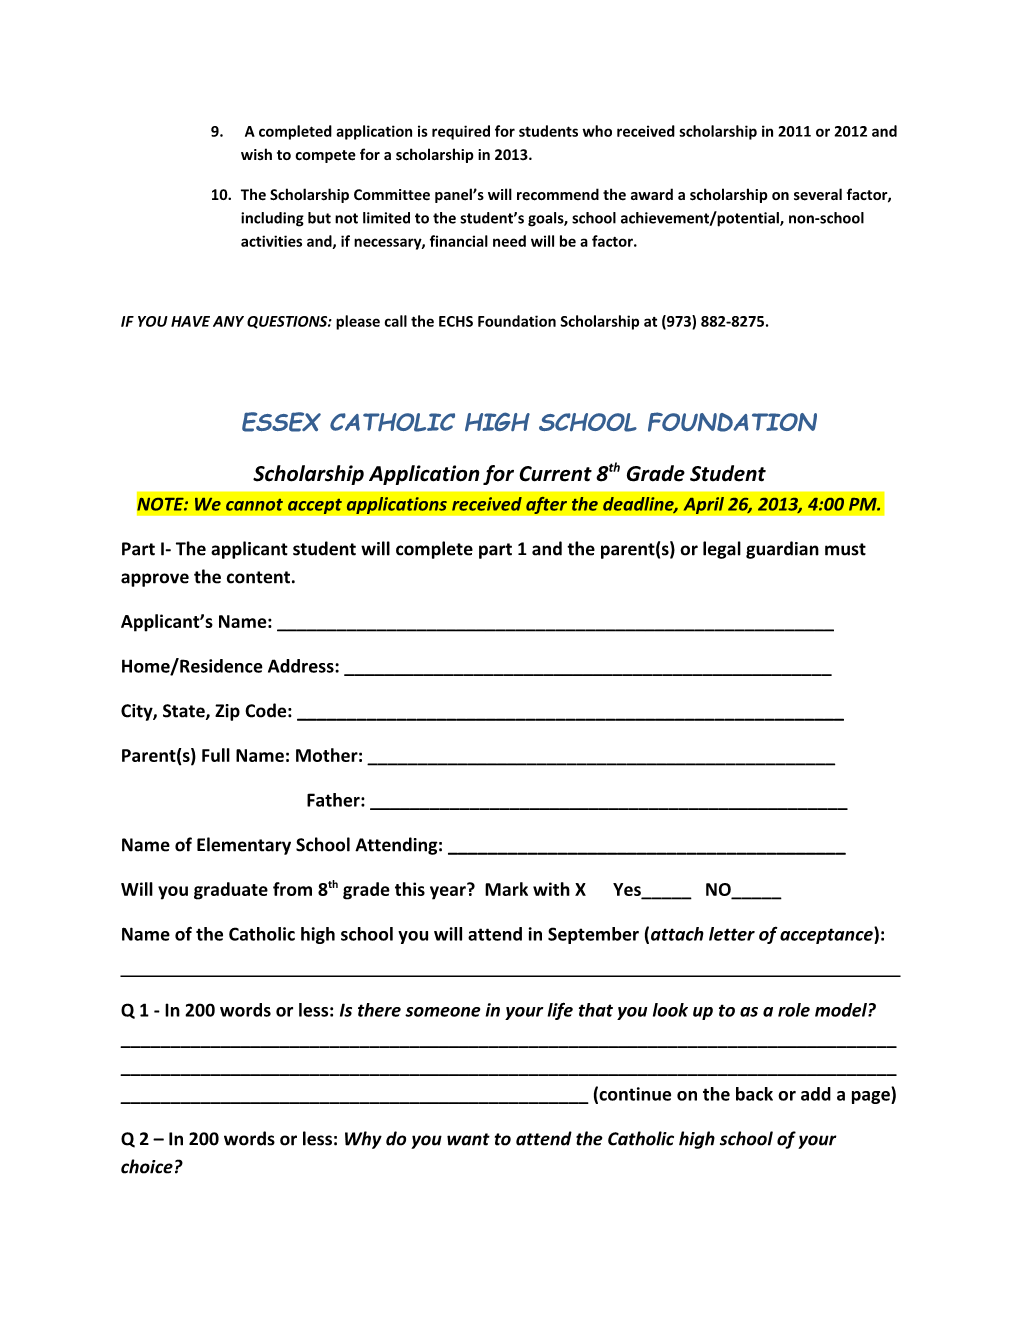 Essex Catholic High School Foundation Scholarshipgeneral Eligibility Information And